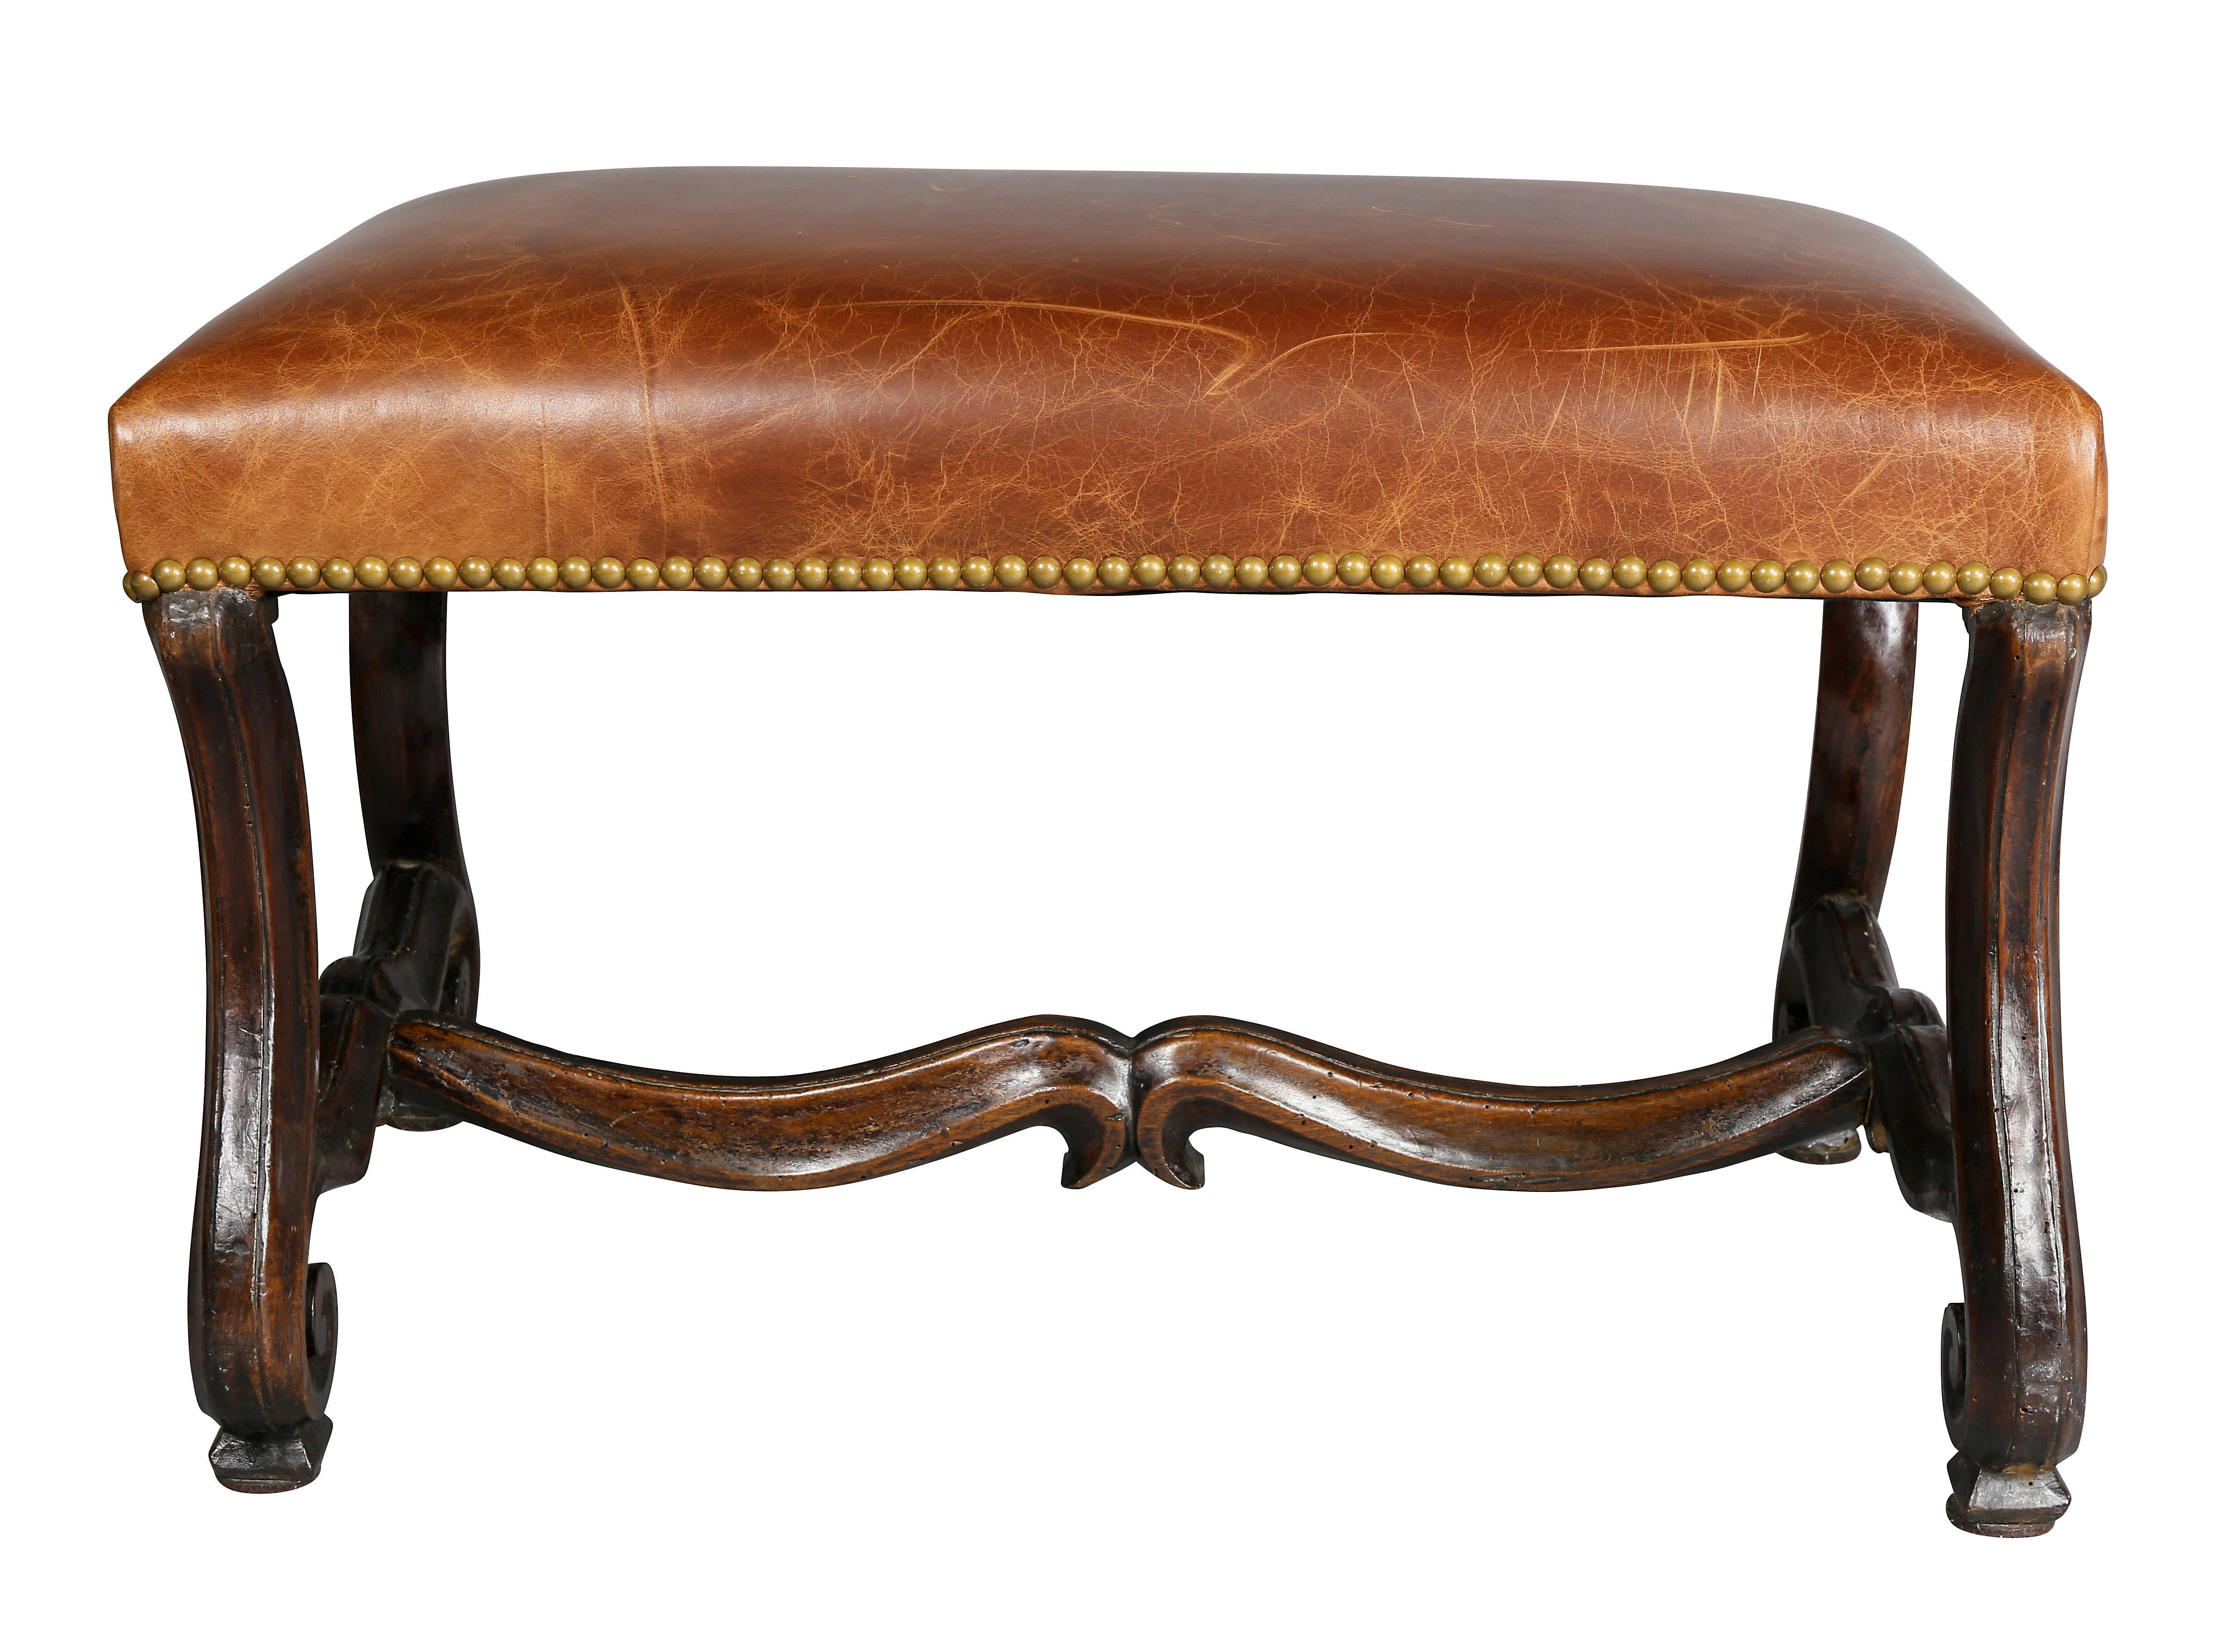 With rectangular brown leather seat with brass tacks, raised on Os De Mouton legs with stretcher.